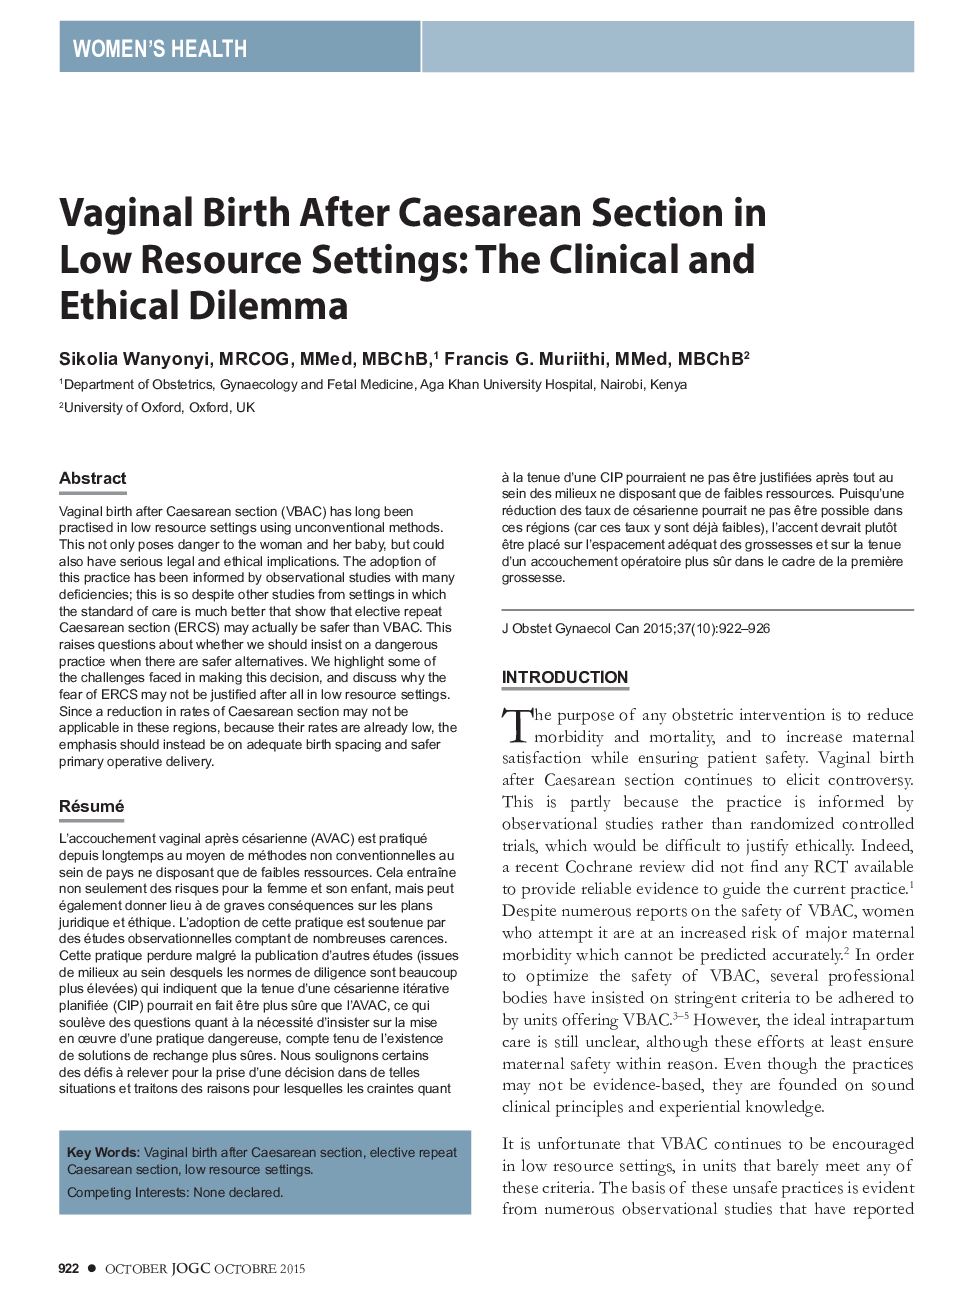 Vaginal Birth After Caesarean Section in Low Resource Settings: The Clinical and Ethical Dilemma